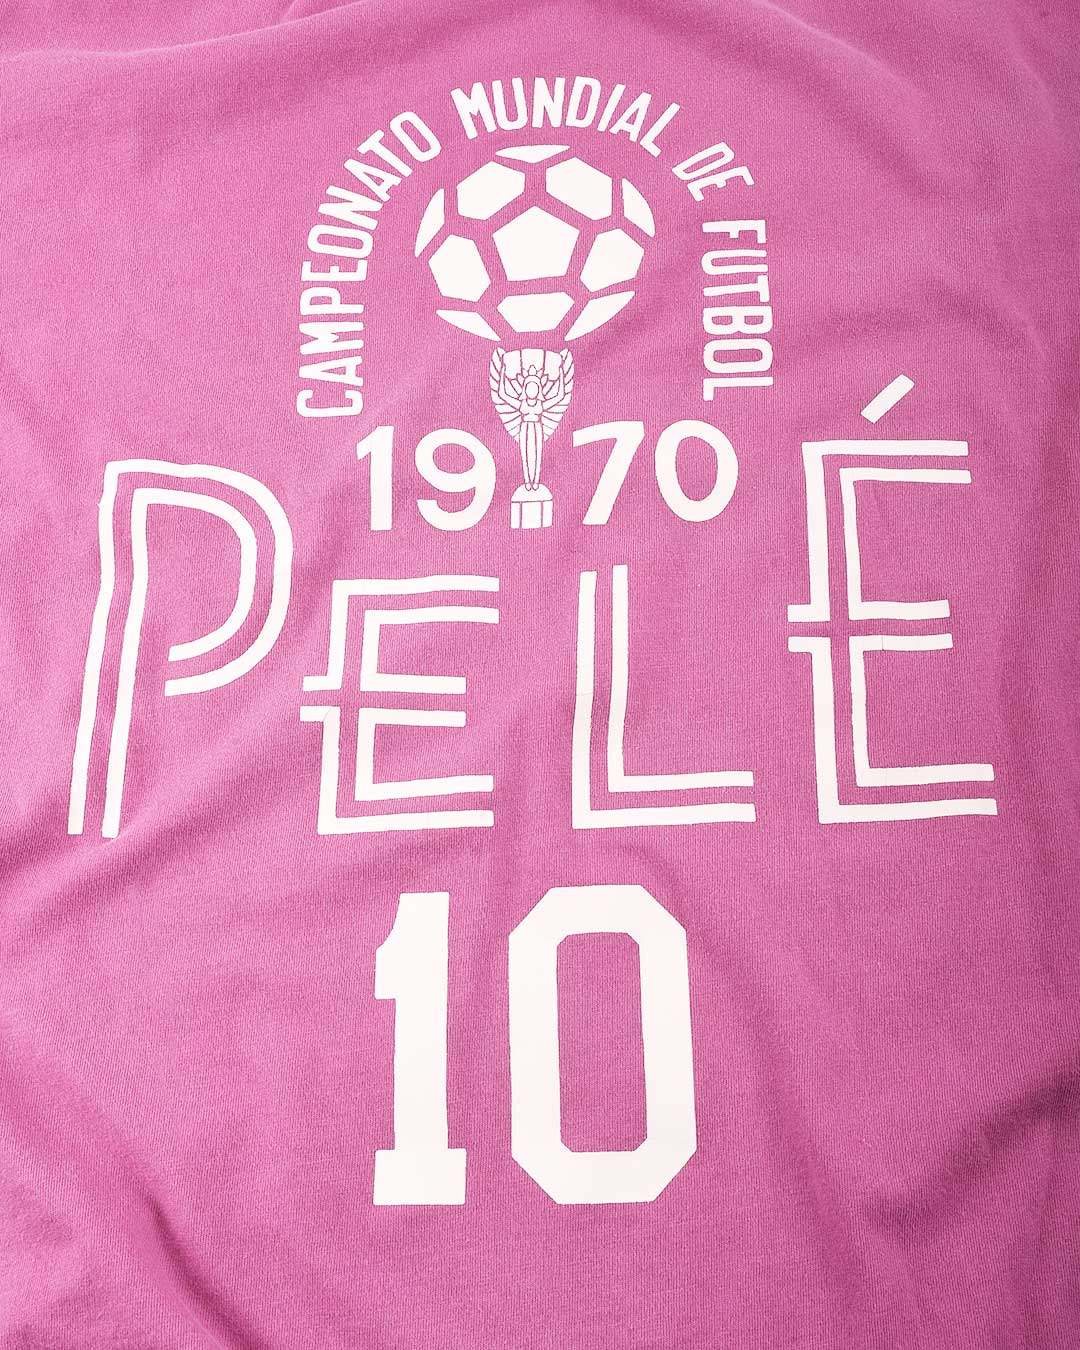 Pelé 1970 Pink Tee - Roots of Fight